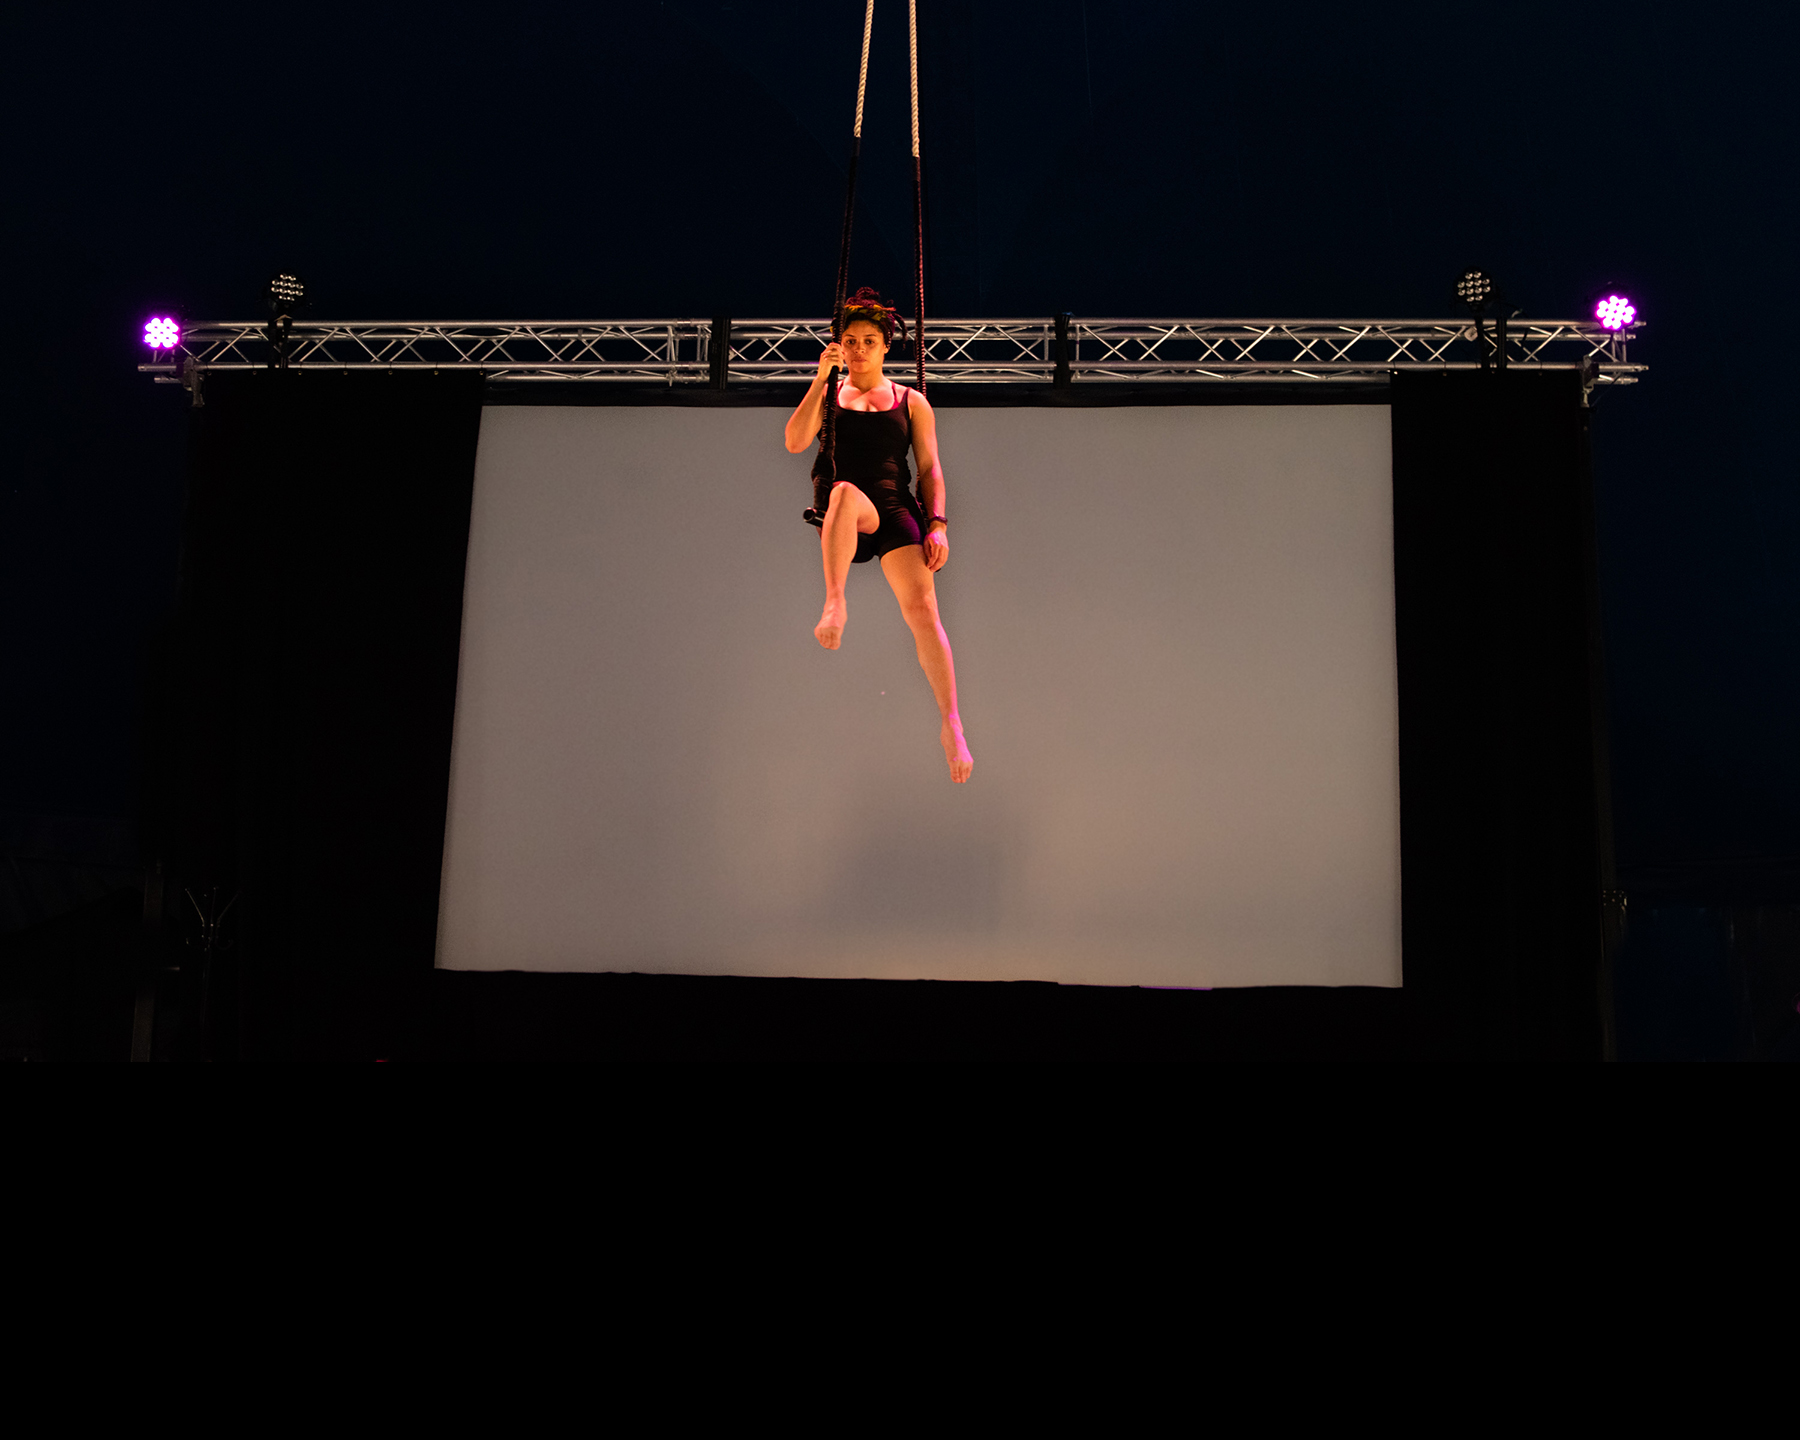 A woman in her twenties with light brown skin and afro hair twisted into a half-up half-down style sits on a trapeze, flying in the air. One of her legs is bent and pointing towards us. Behind her, steal rigging and purple lights and a white screen.